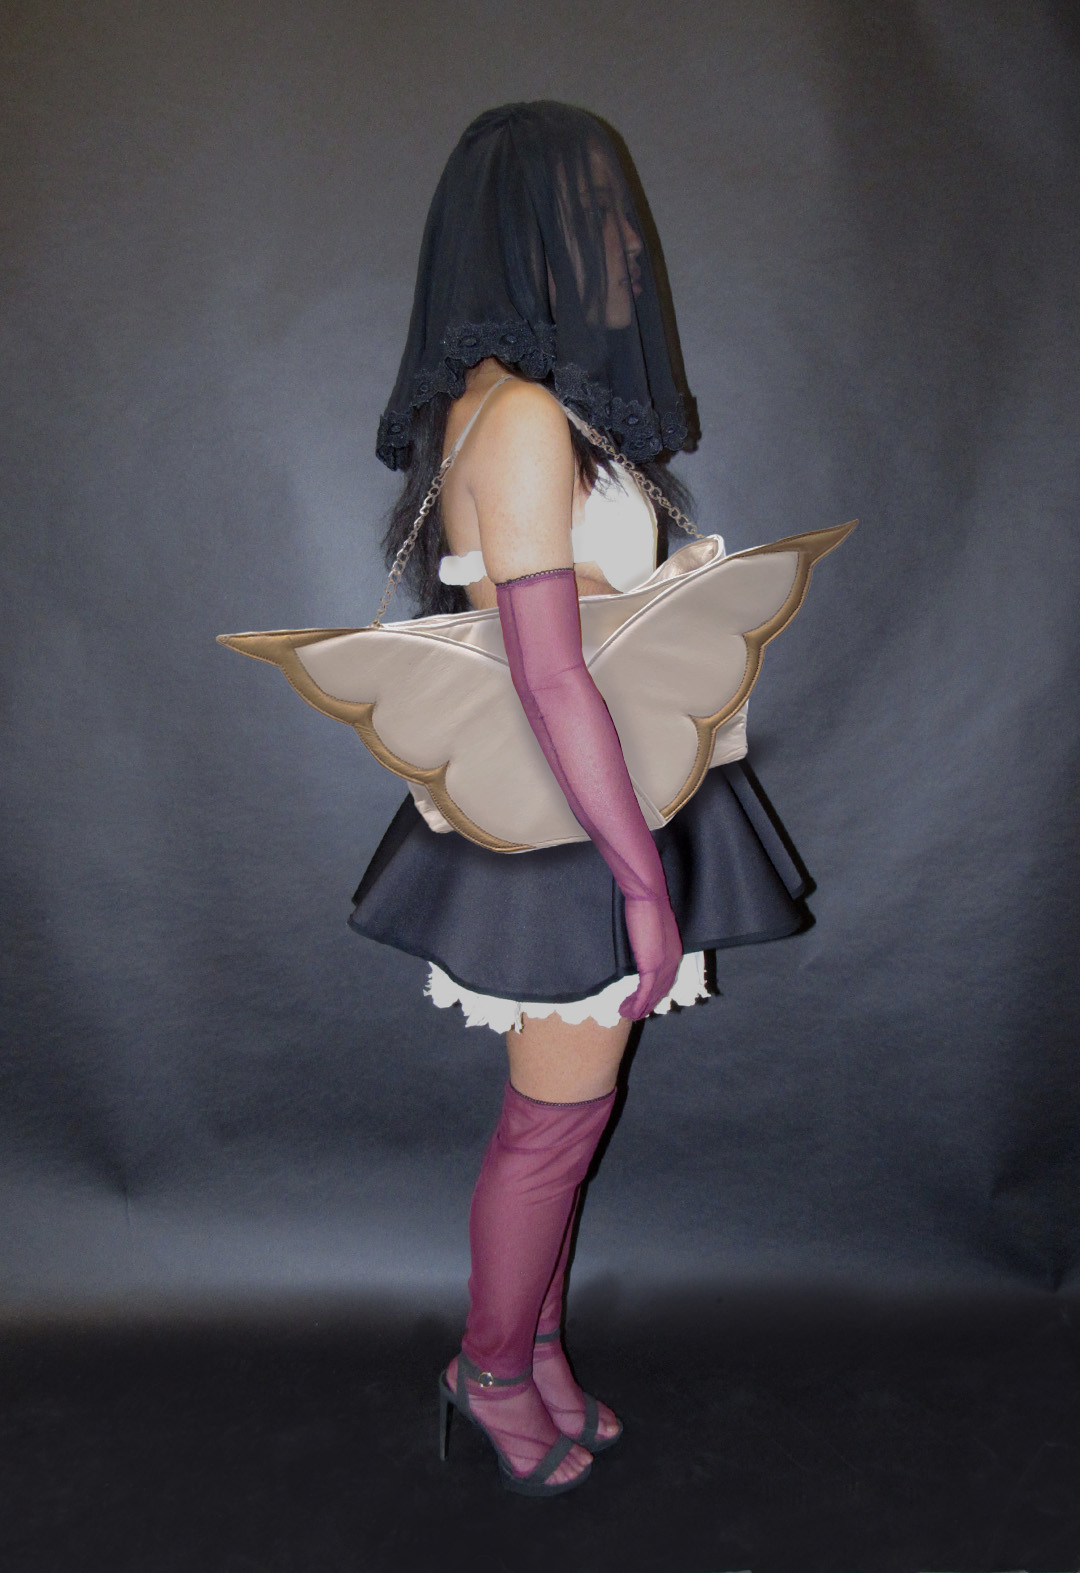 Side-view, full-body shot of a model. She wears a black draped, embroidered veil, an ivory heart-shaped bustier, a black-and-white two-tiered miniskirt, deep-pink gloves, and thigh-high socks. She is holding an oversized ivory-and-gold tote bag with angel-wing motifs.